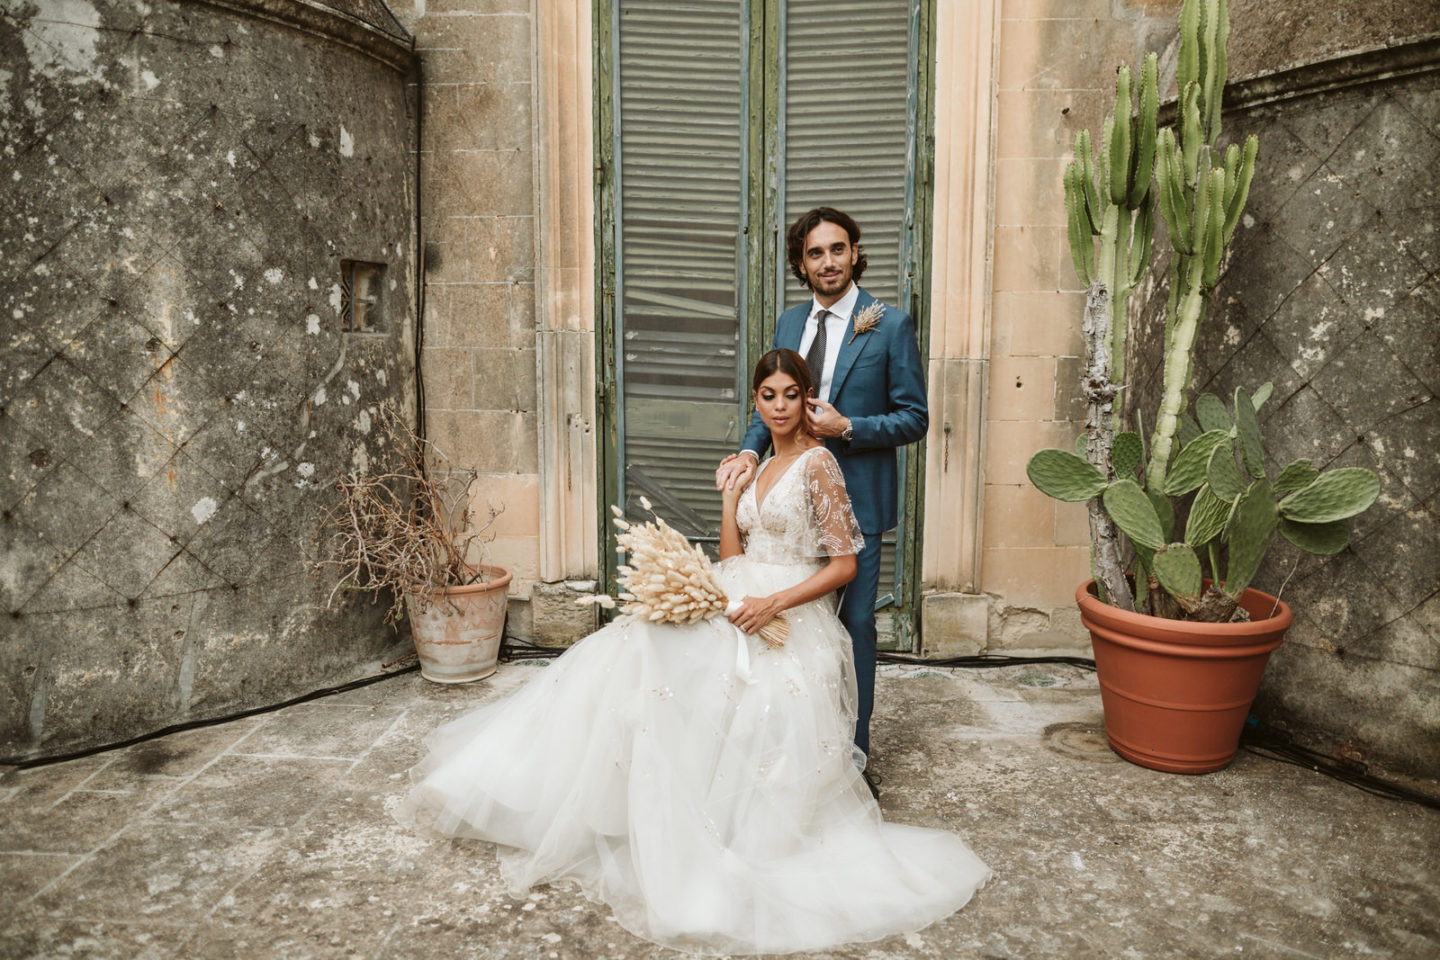 Italian Wedding With Modern Baroque Vibes in Puglia, Italy